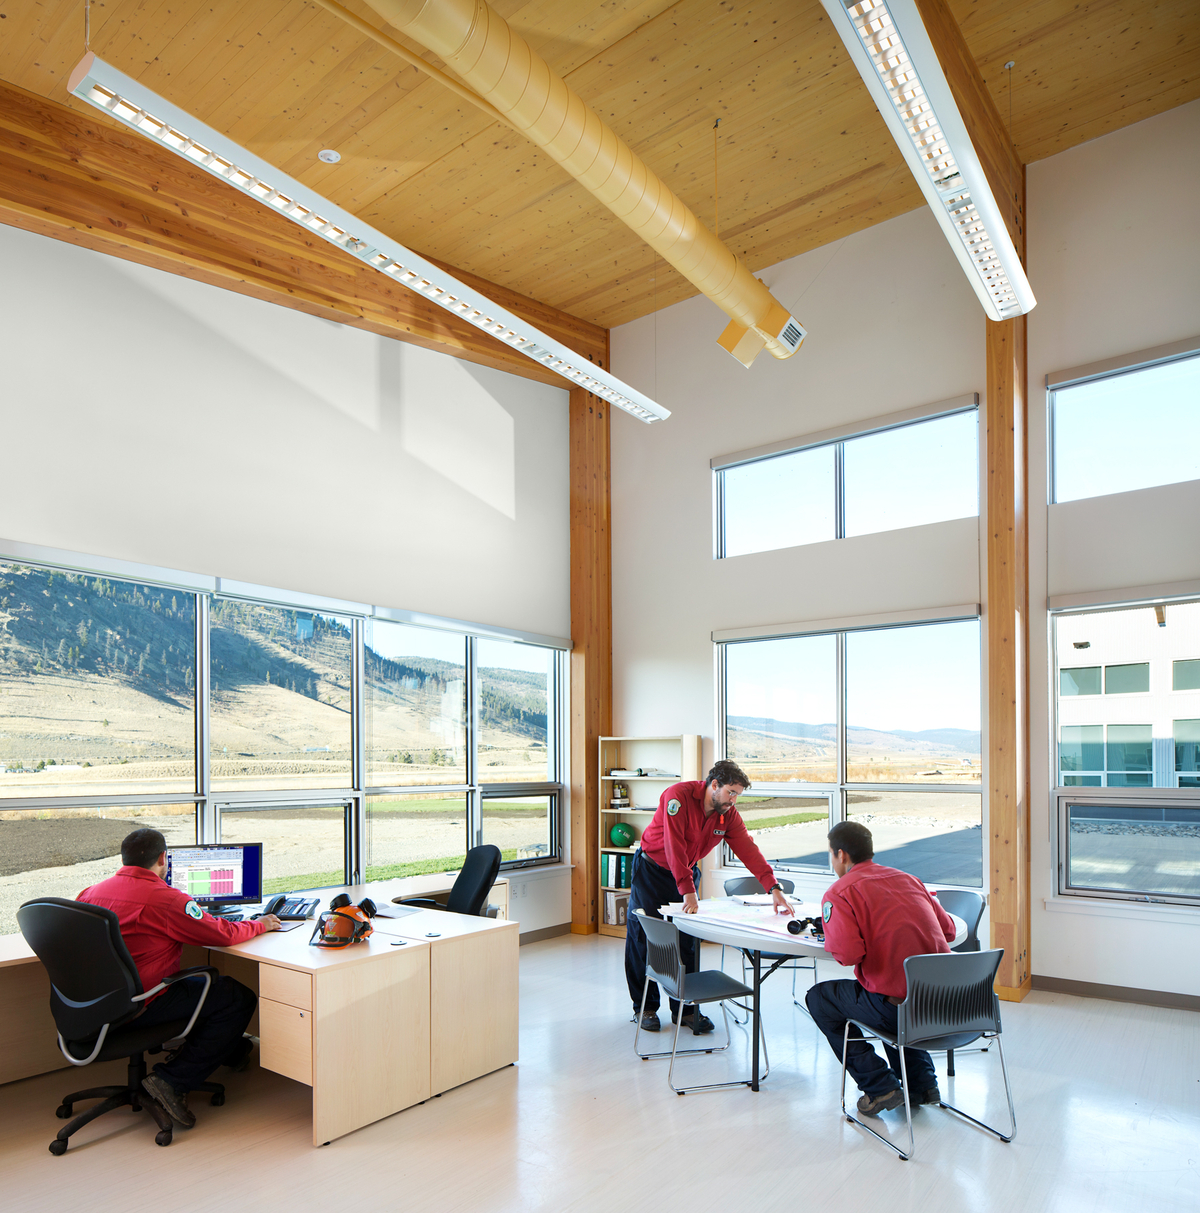 Occupied interior daytime view of low rise Merritt Fire Zone Office and Provincial Wildfire Training Centre showing combination of glue-laminated timber (glulam) post and beam and light wood-frame construction